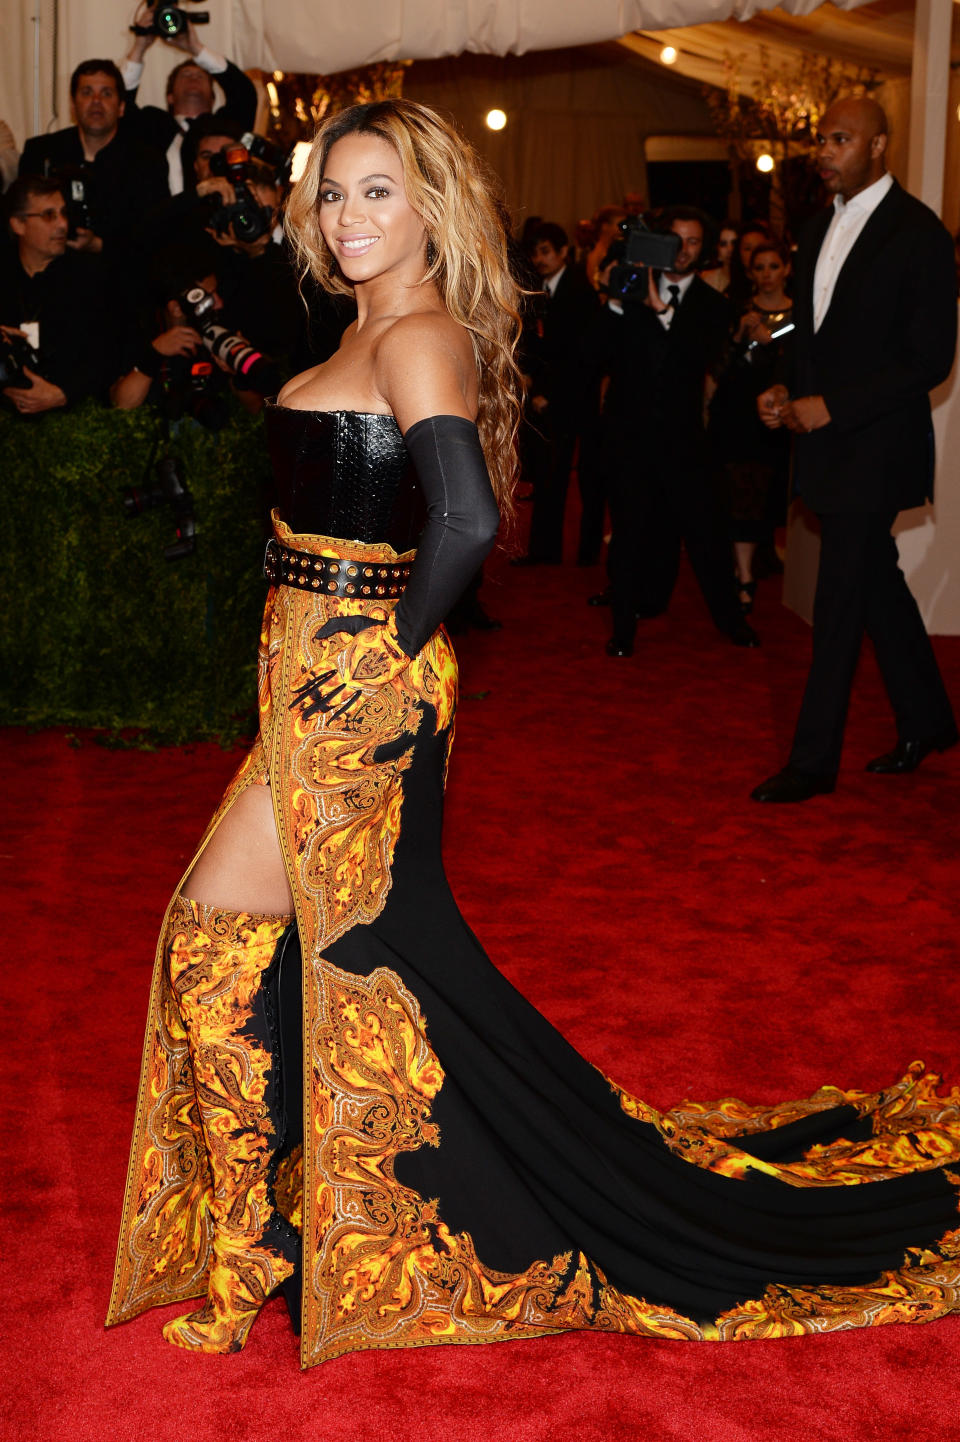 Craziest Met Gala Shoes of All Time, 2013: Beyoncé